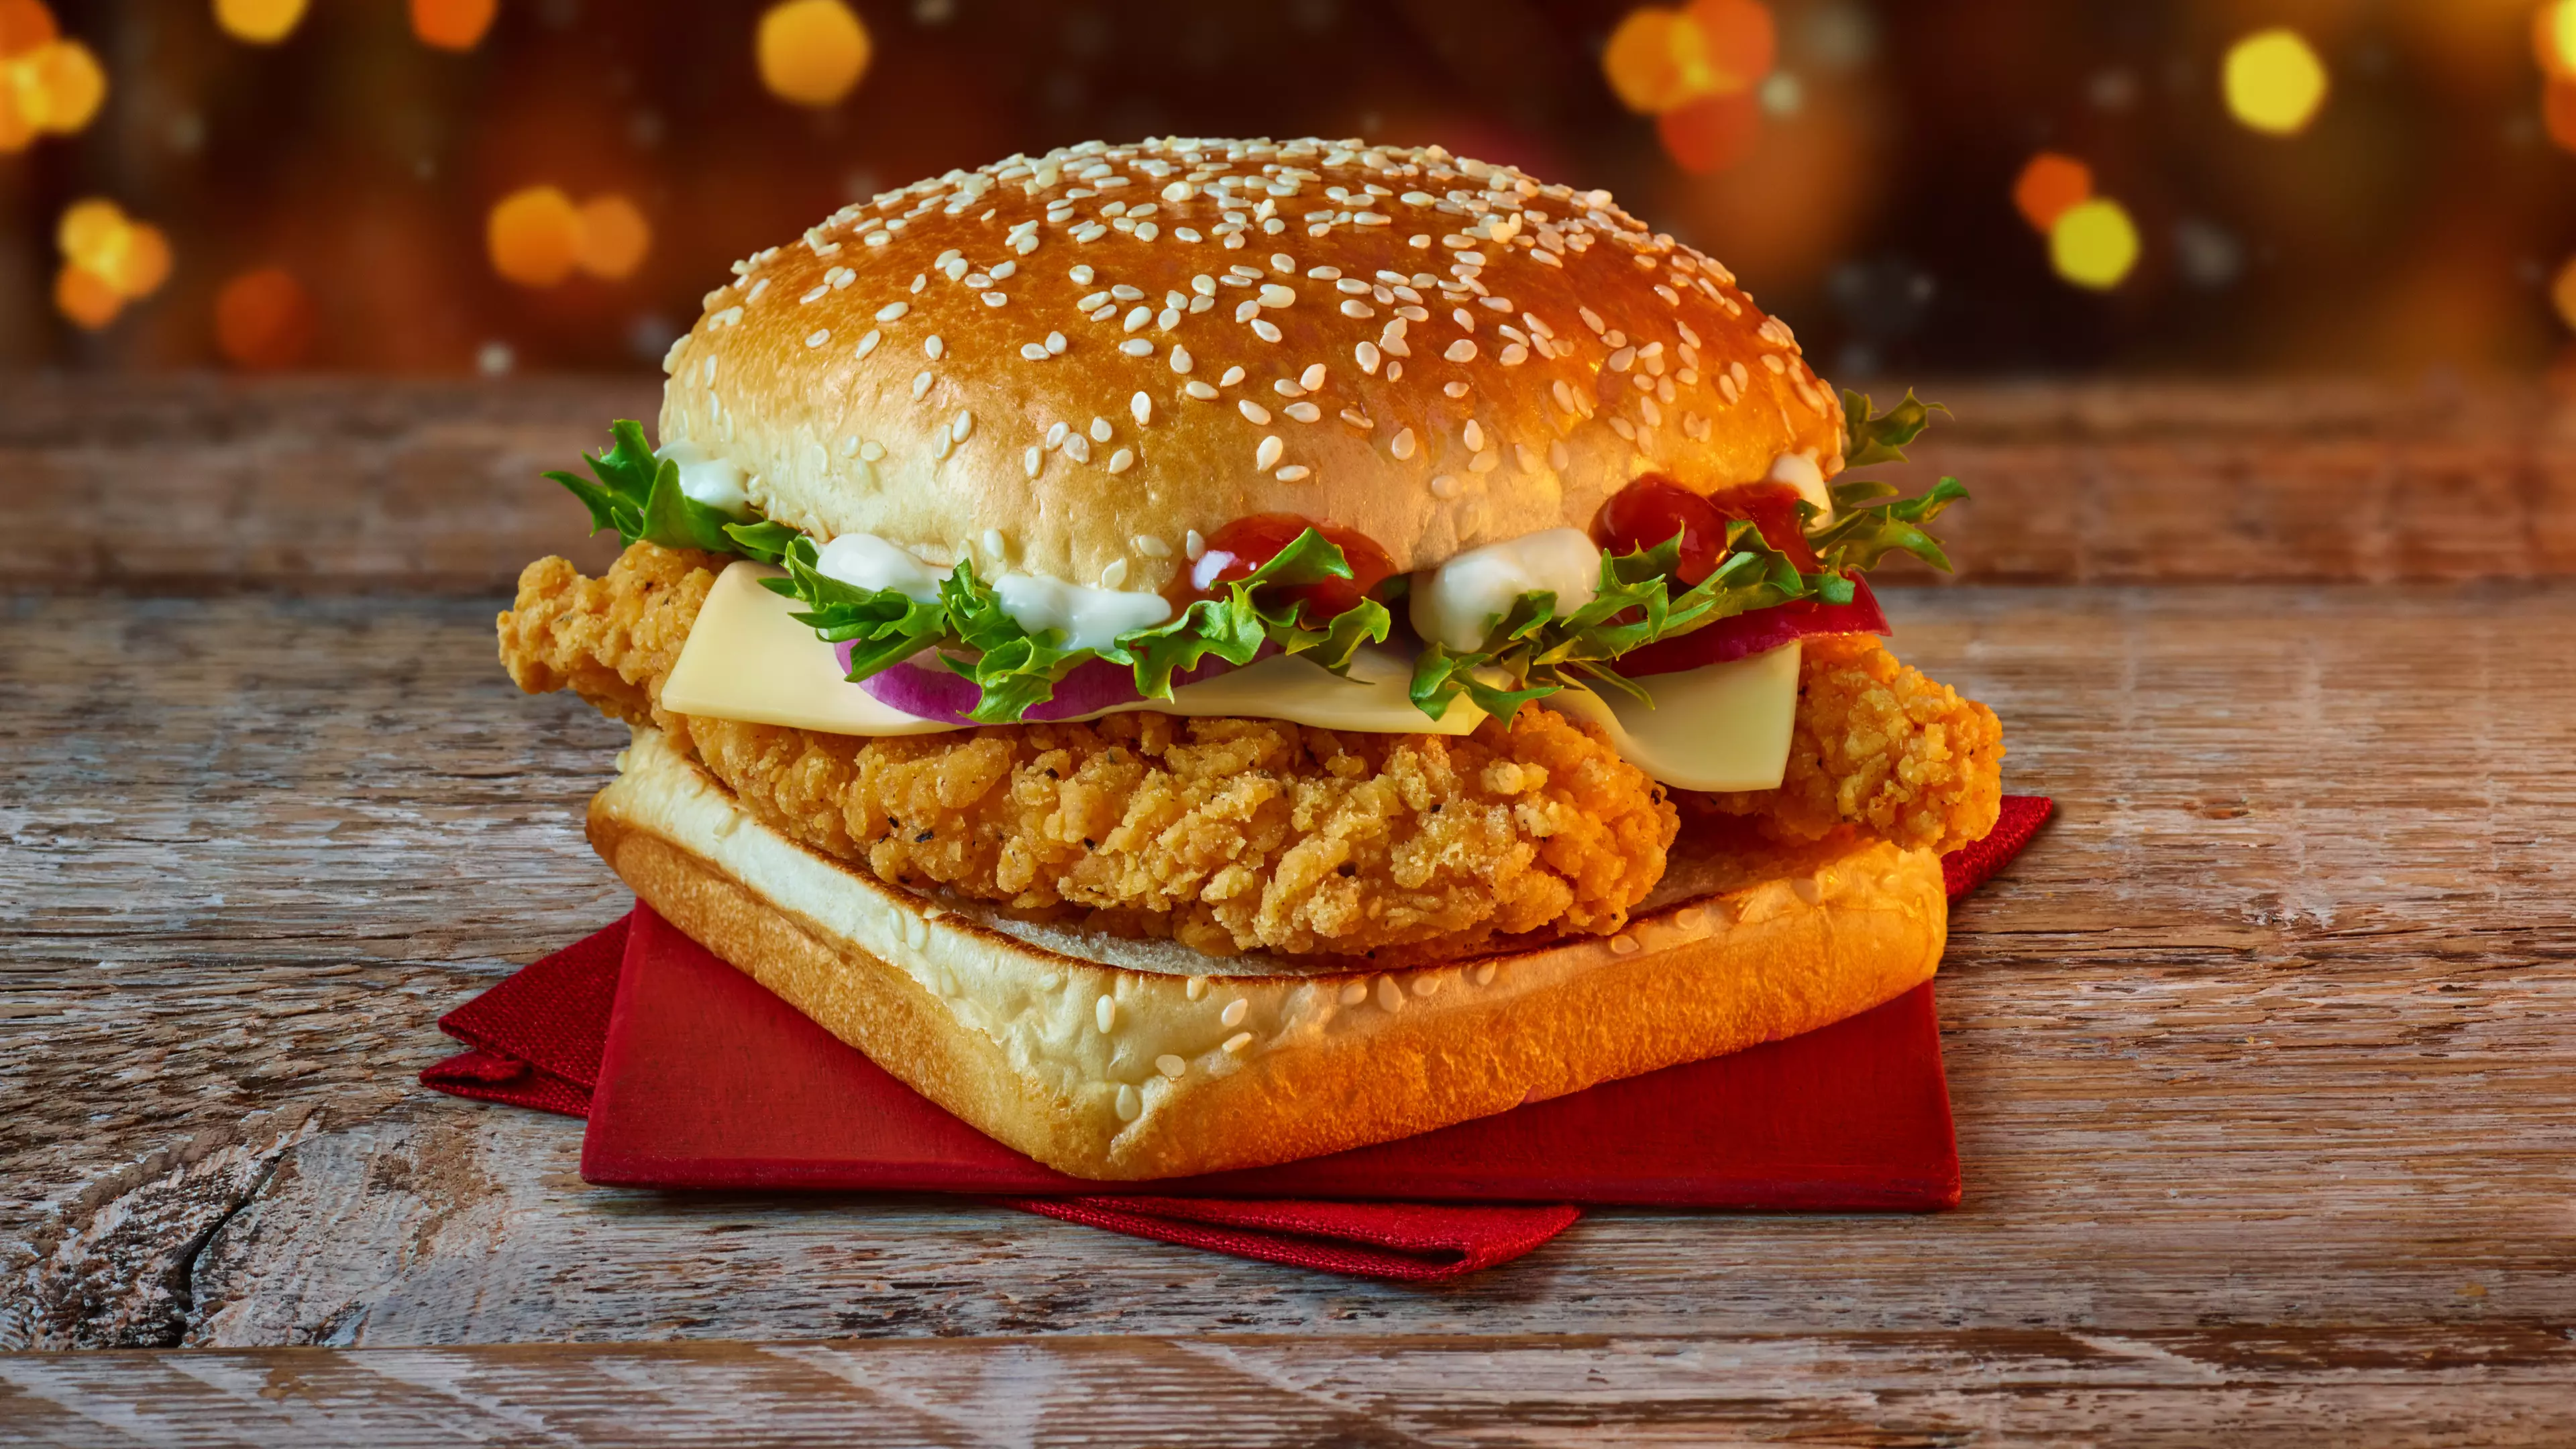 McDonald's Has Launched Its Christmas Menu With A New Addition